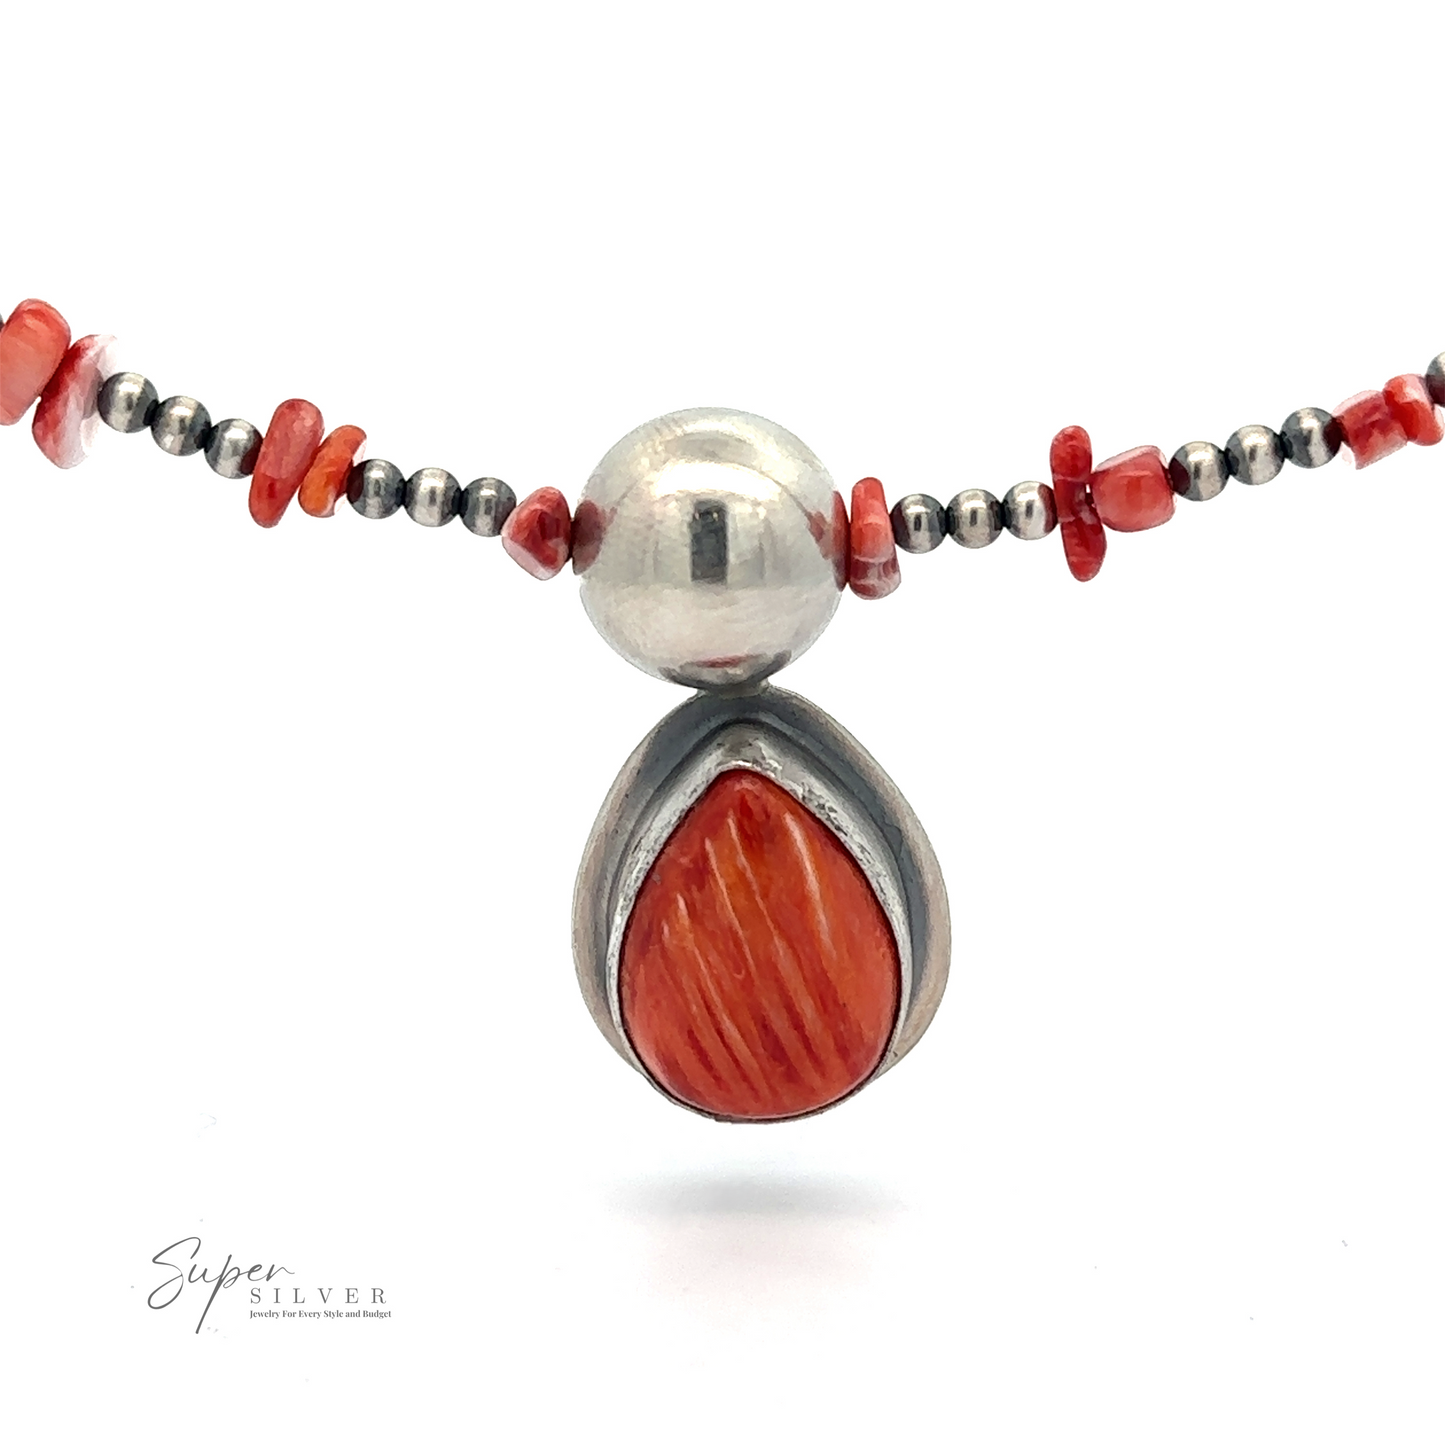 
                  
                    A close-up image of a necklace featuring a silver pendant with a teardrop-shaped red stone, surrounded by small red and silver beads. Created by Native American artisans, the brand name "Wrap Around Spiny Oyster Shell Choker Necklace" is visible at the bottom left.
                  
                